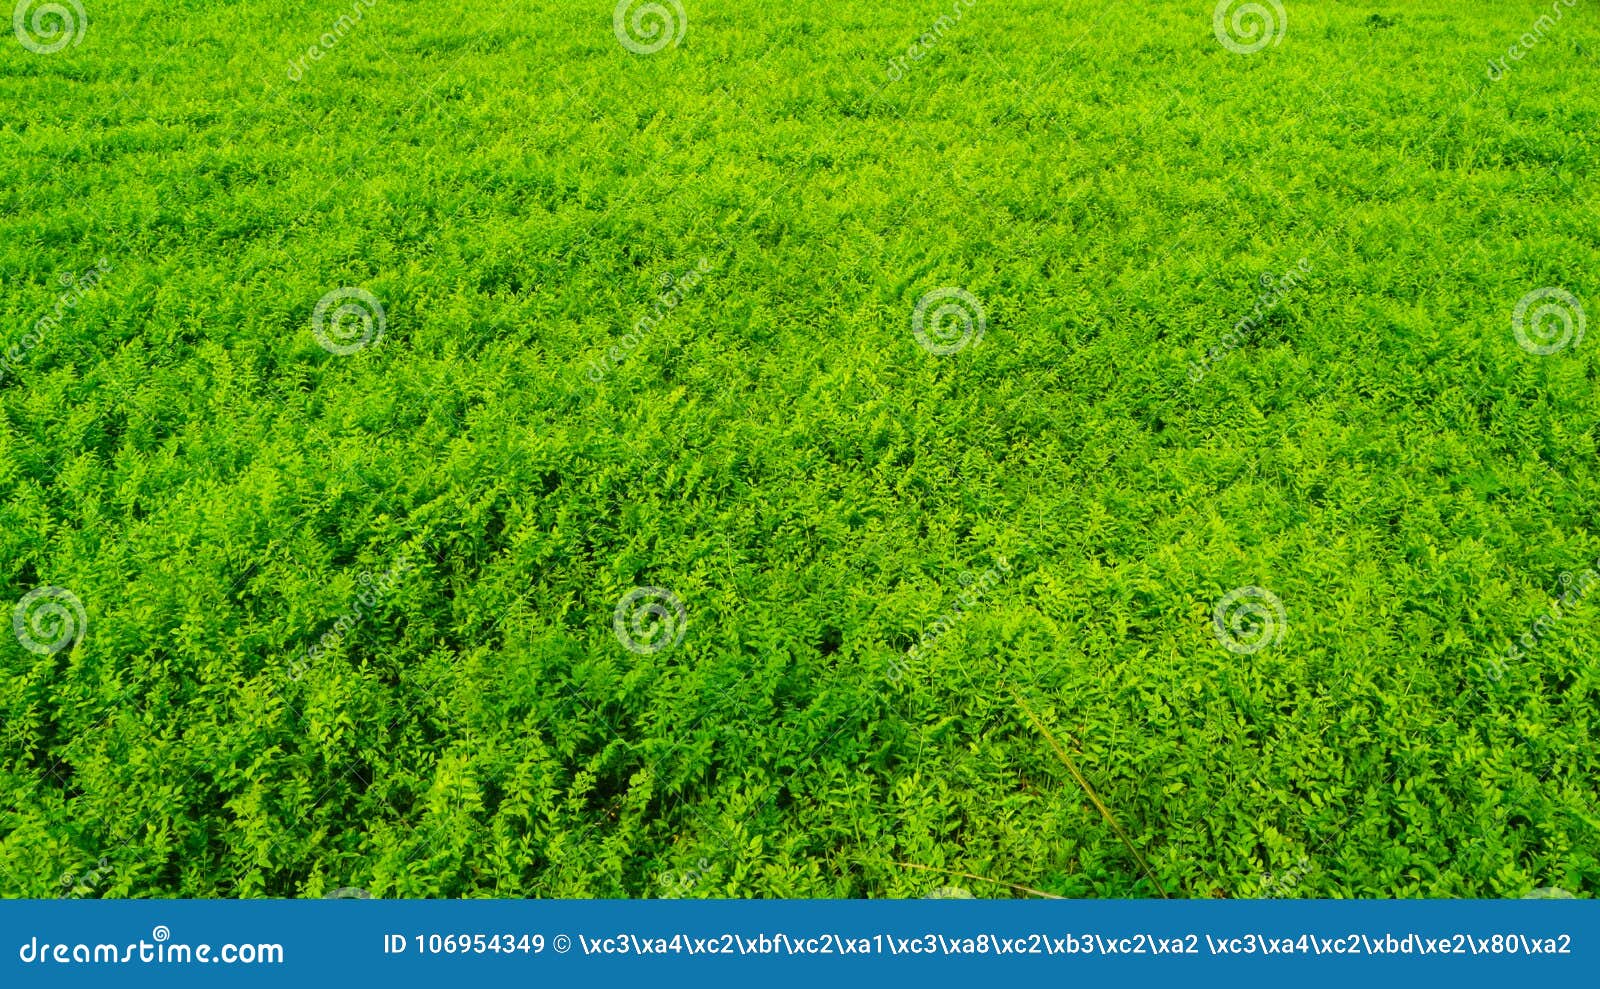 the grassland in green